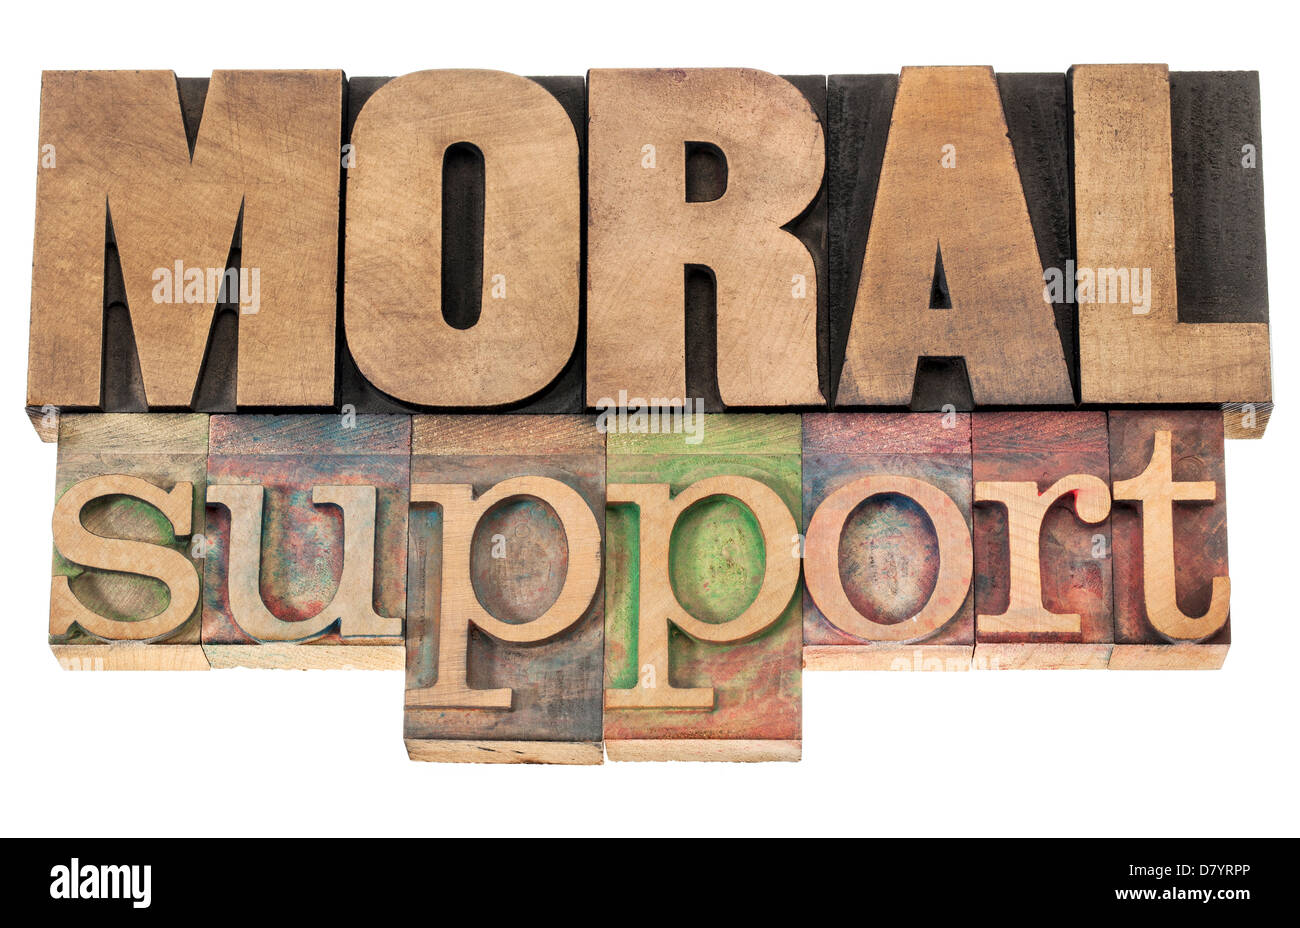 moral support - isolated text in letterpress wood type printing blocks Stock Photo